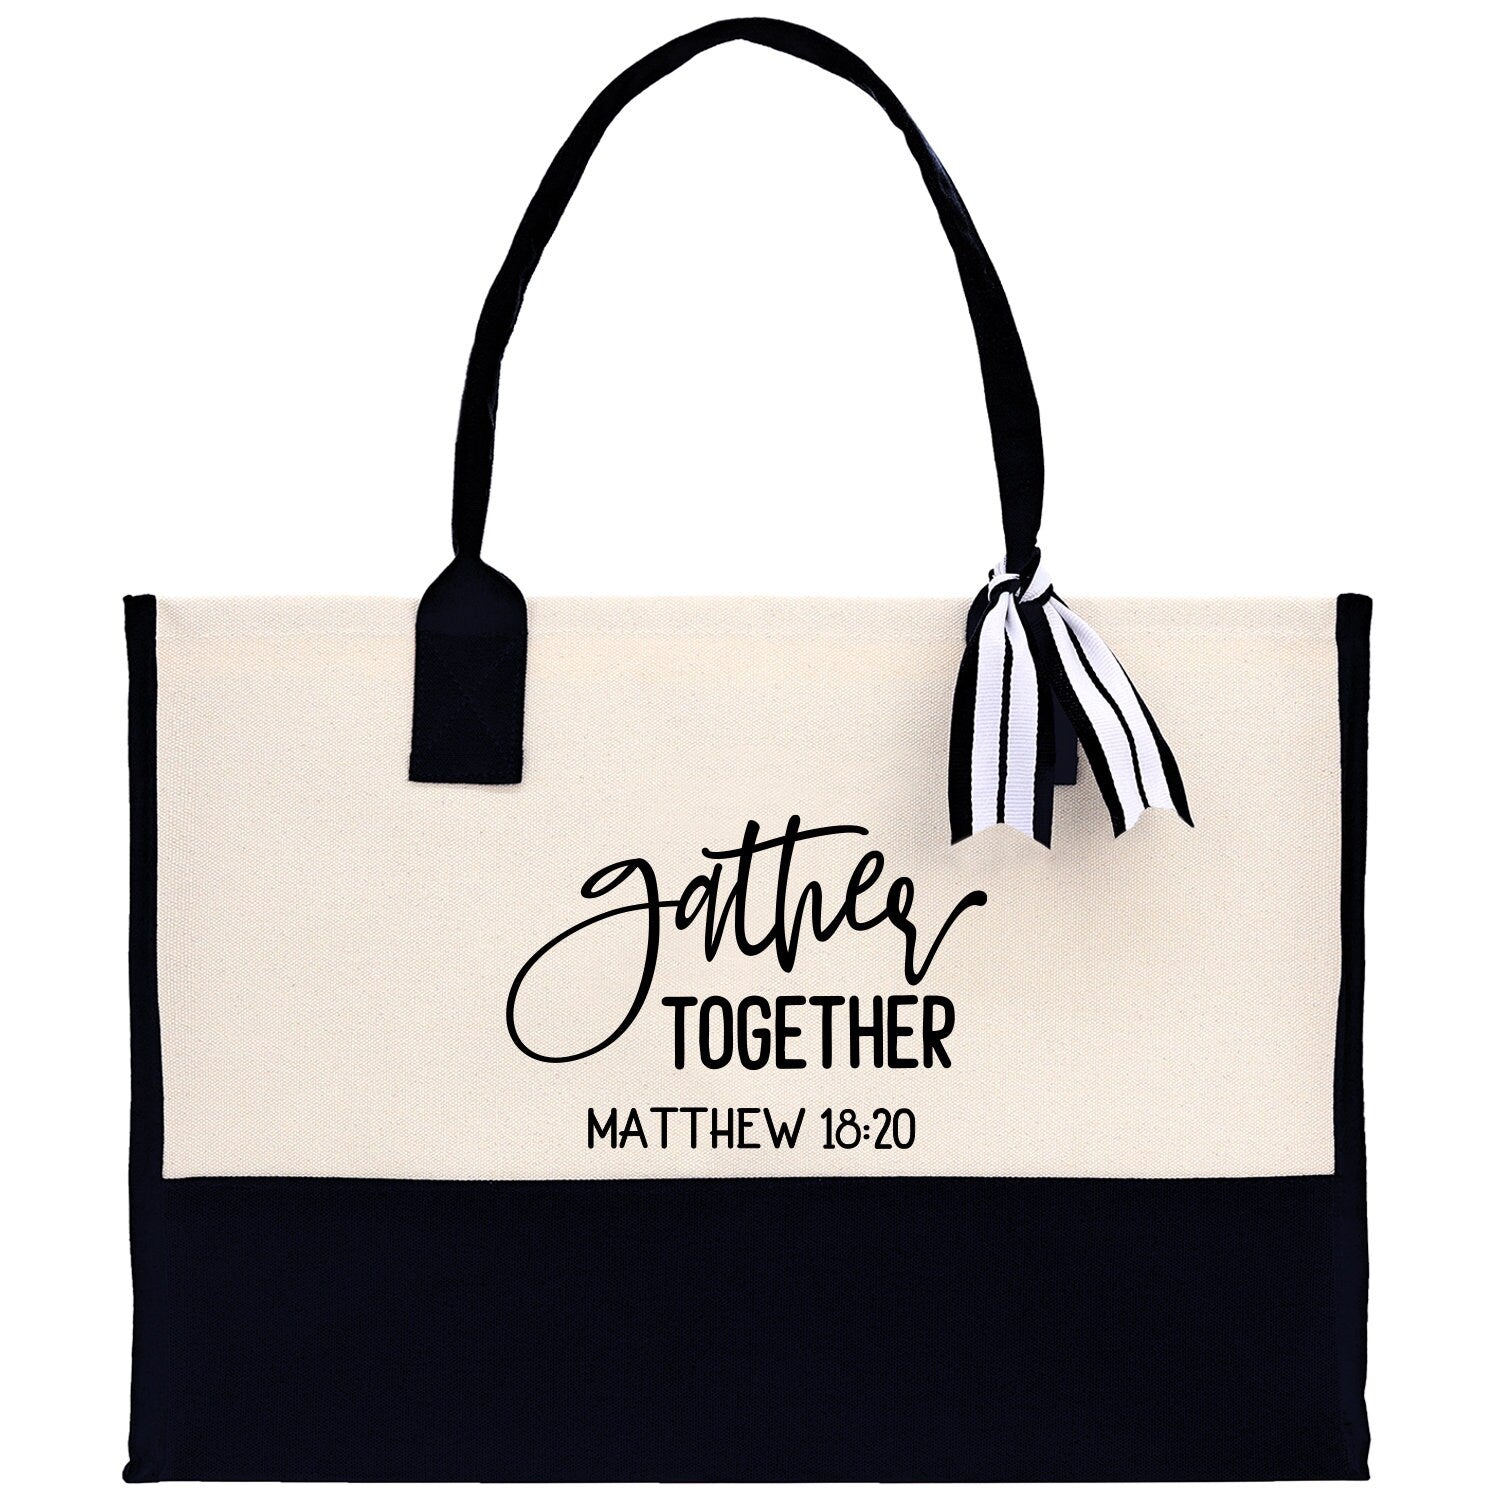 Gather Together Matthew 18:20 Religious Tote Bag for Women Bible Verse Canvas Tote Bag Religious Gifts Bible Verse Gift Church Tote Bag